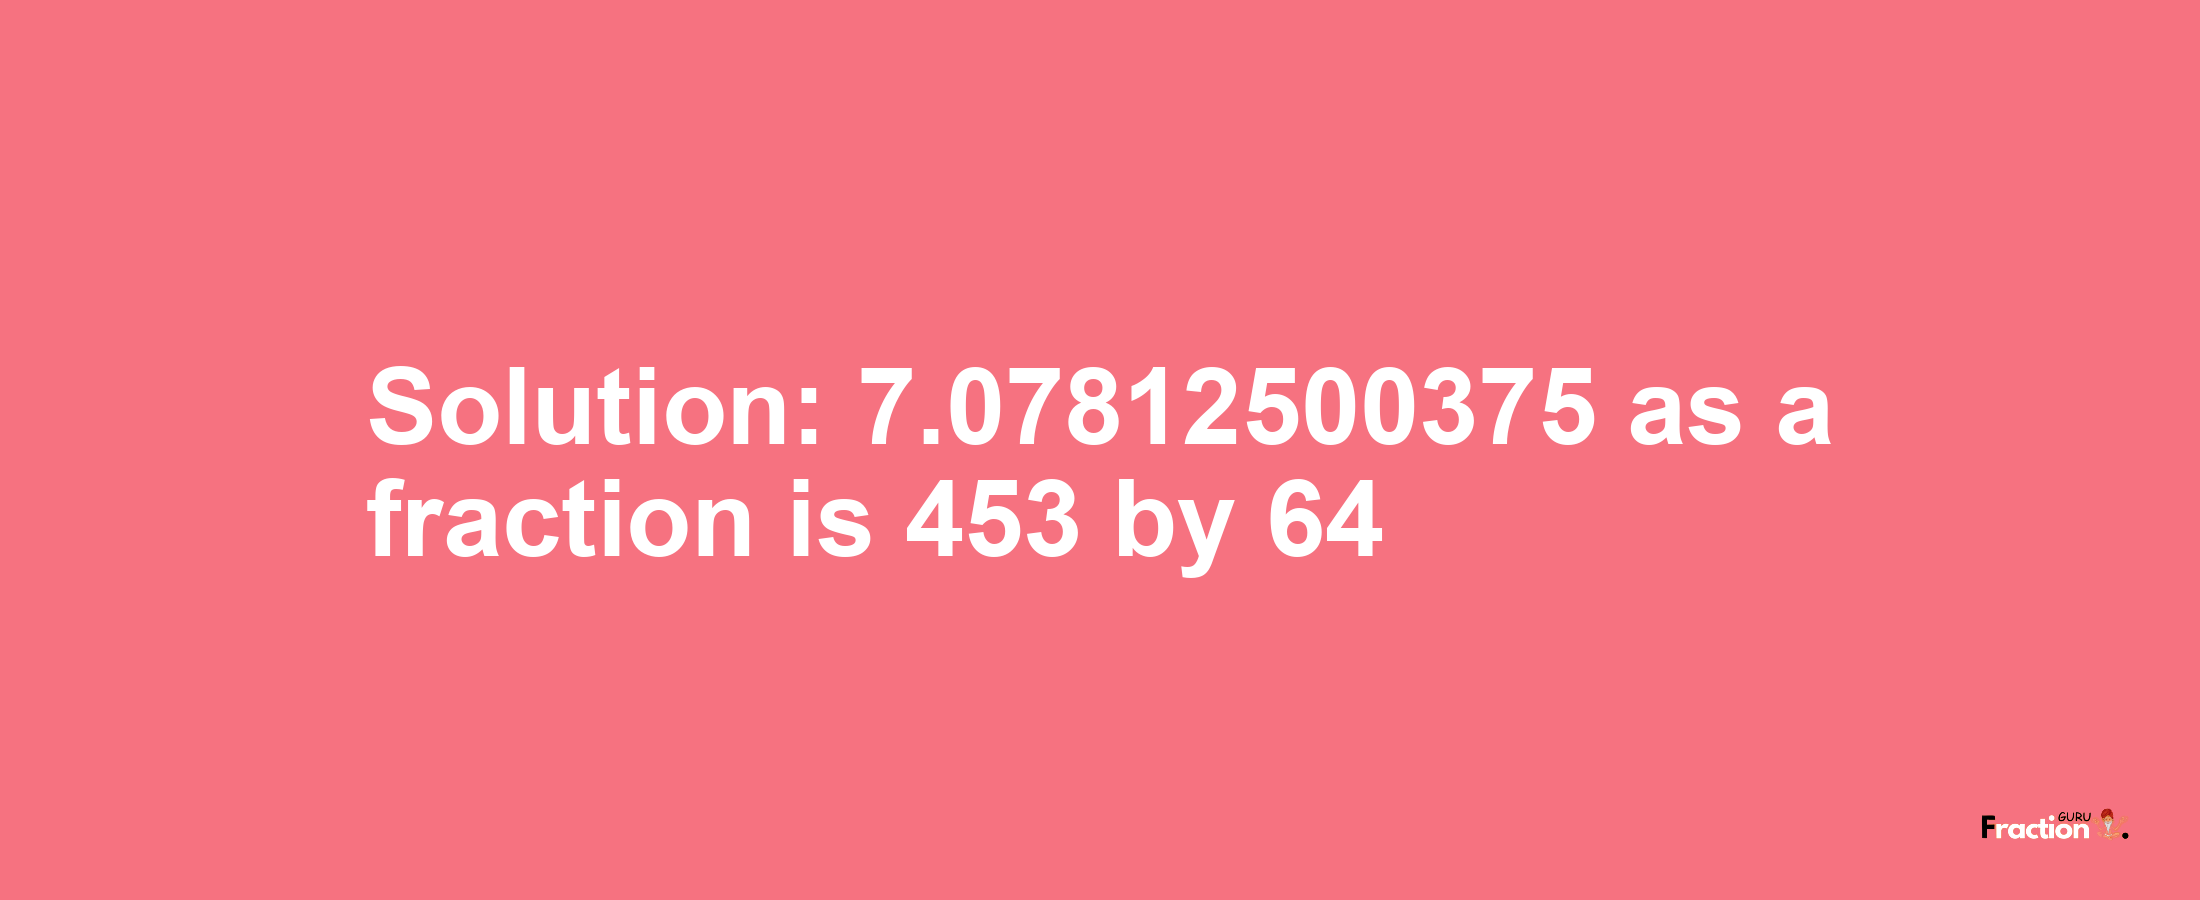 Solution:7.07812500375 as a fraction is 453/64